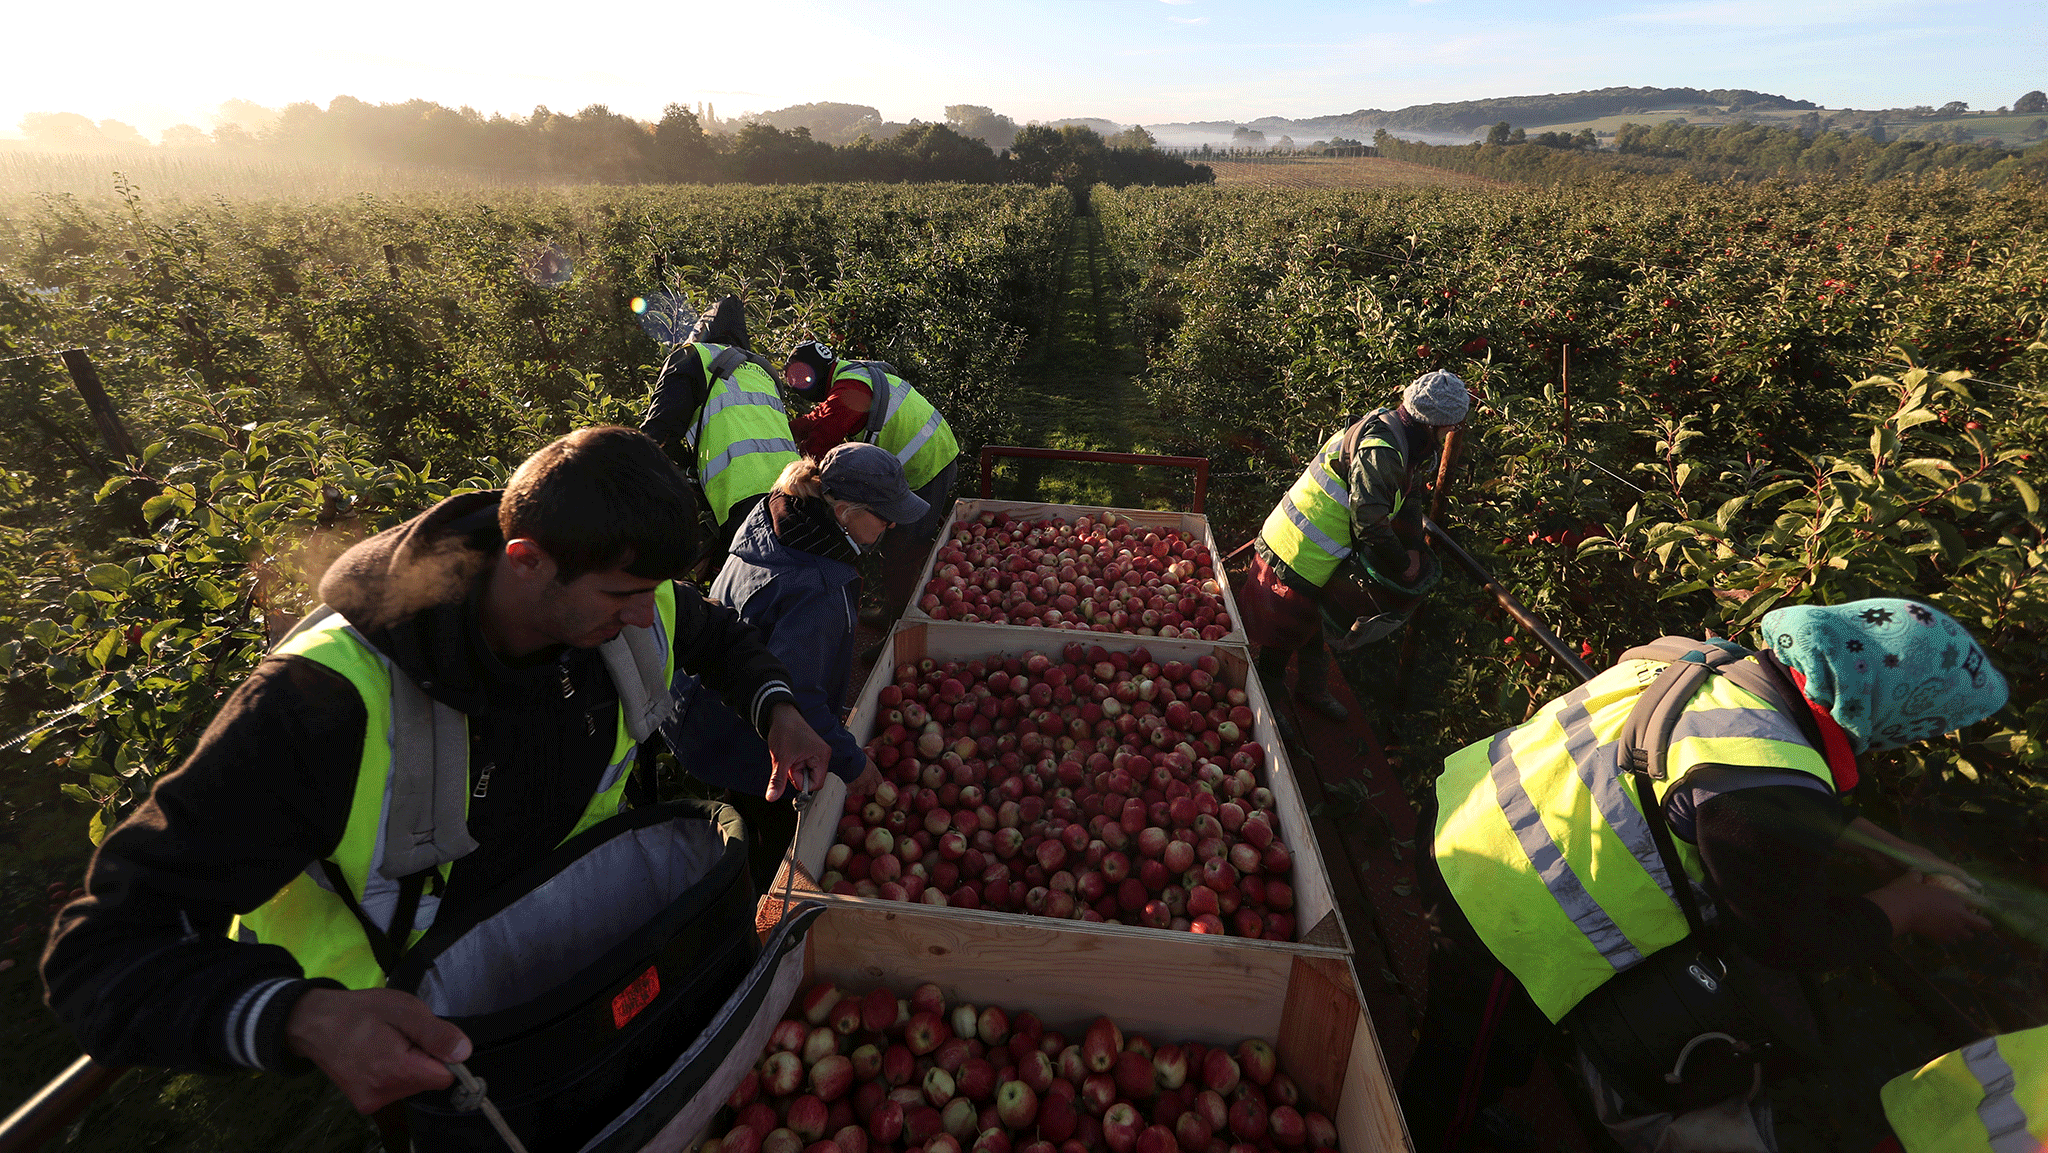 Agriculture has been one of the first industries to be hit by a shortage of willing migrant labour; others look likely to follow